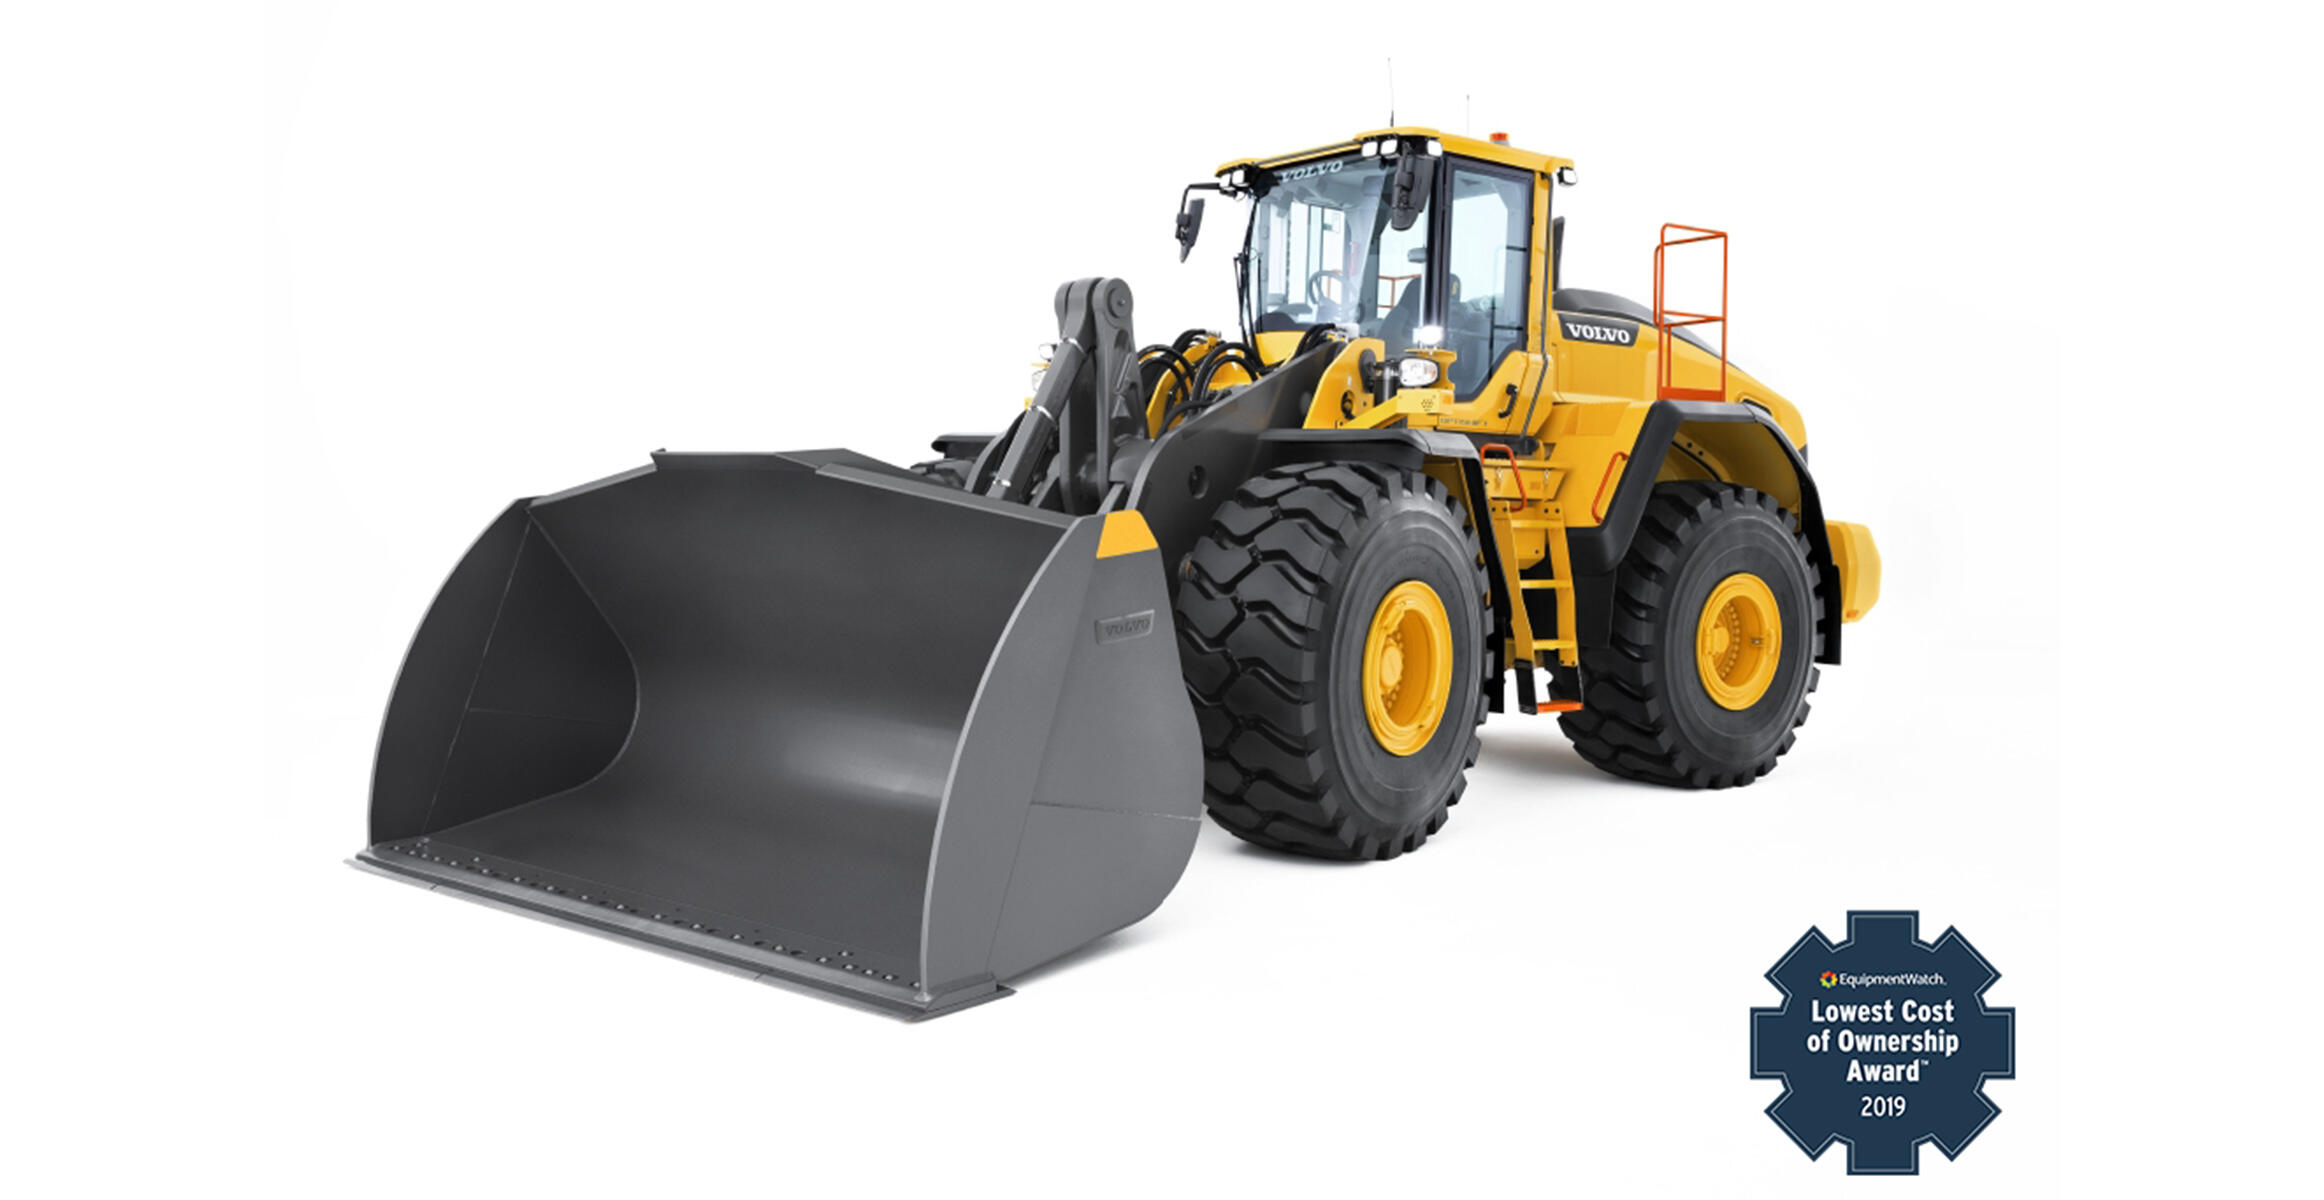 Volvo L180H Wheel Loader wins the 2019 EquipmentWatch Lowest Cost of Ownership award